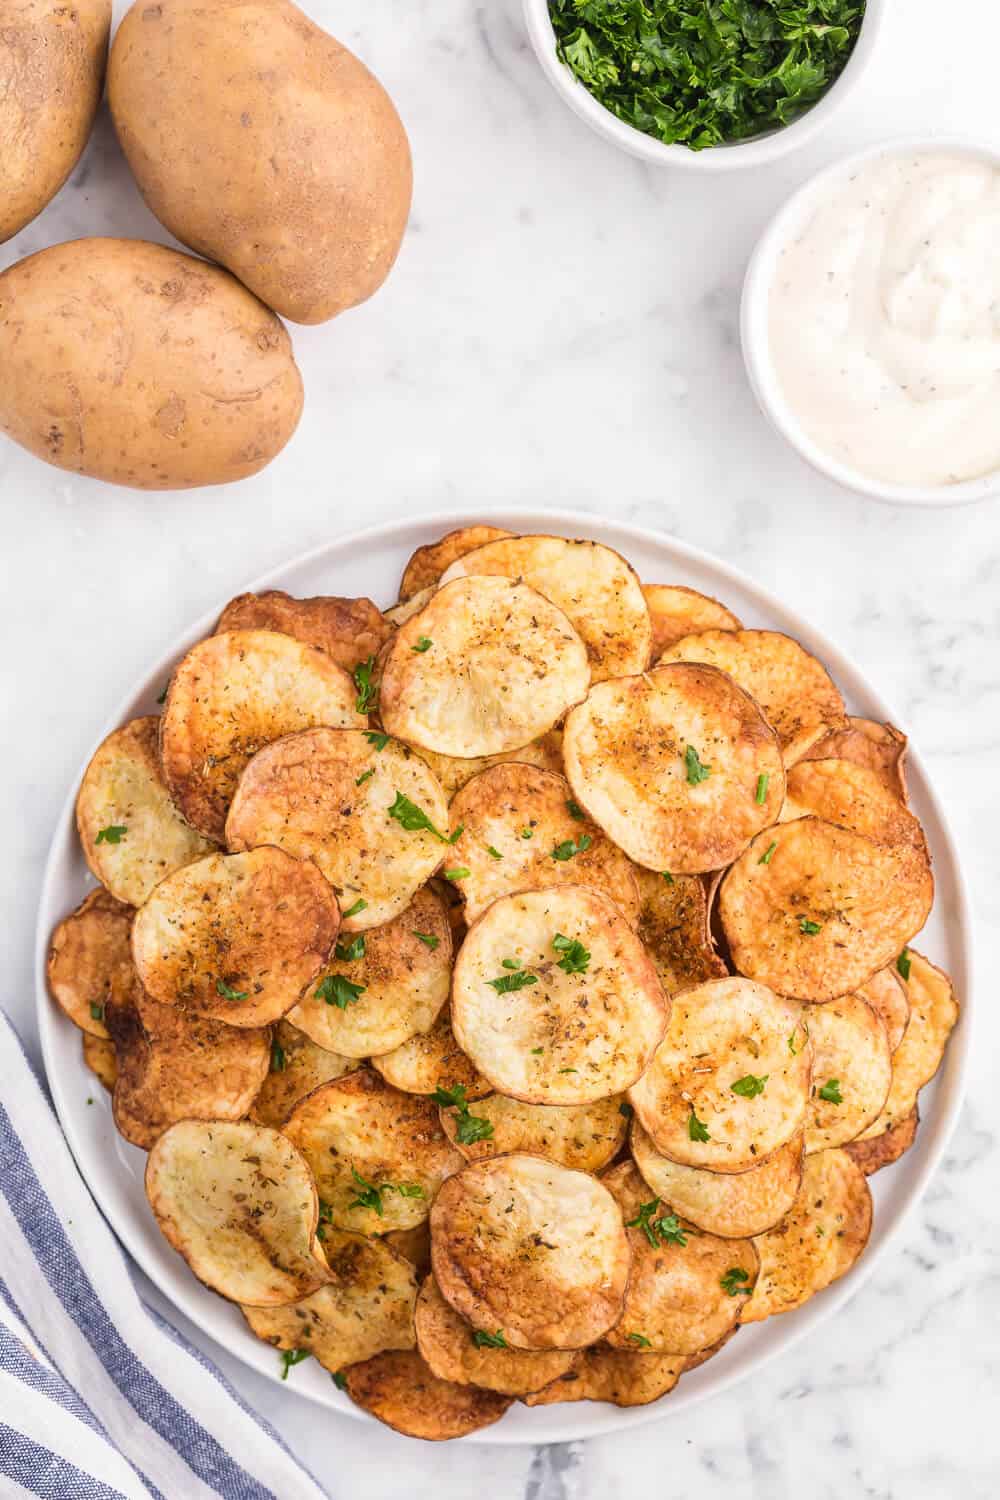 Air Fryer Potato Chips Recipe - These crispy homemade potato chips are super easy to make in the air fryer. Perfect for when you're craving a salty, crunchy snack with loads of flavor!